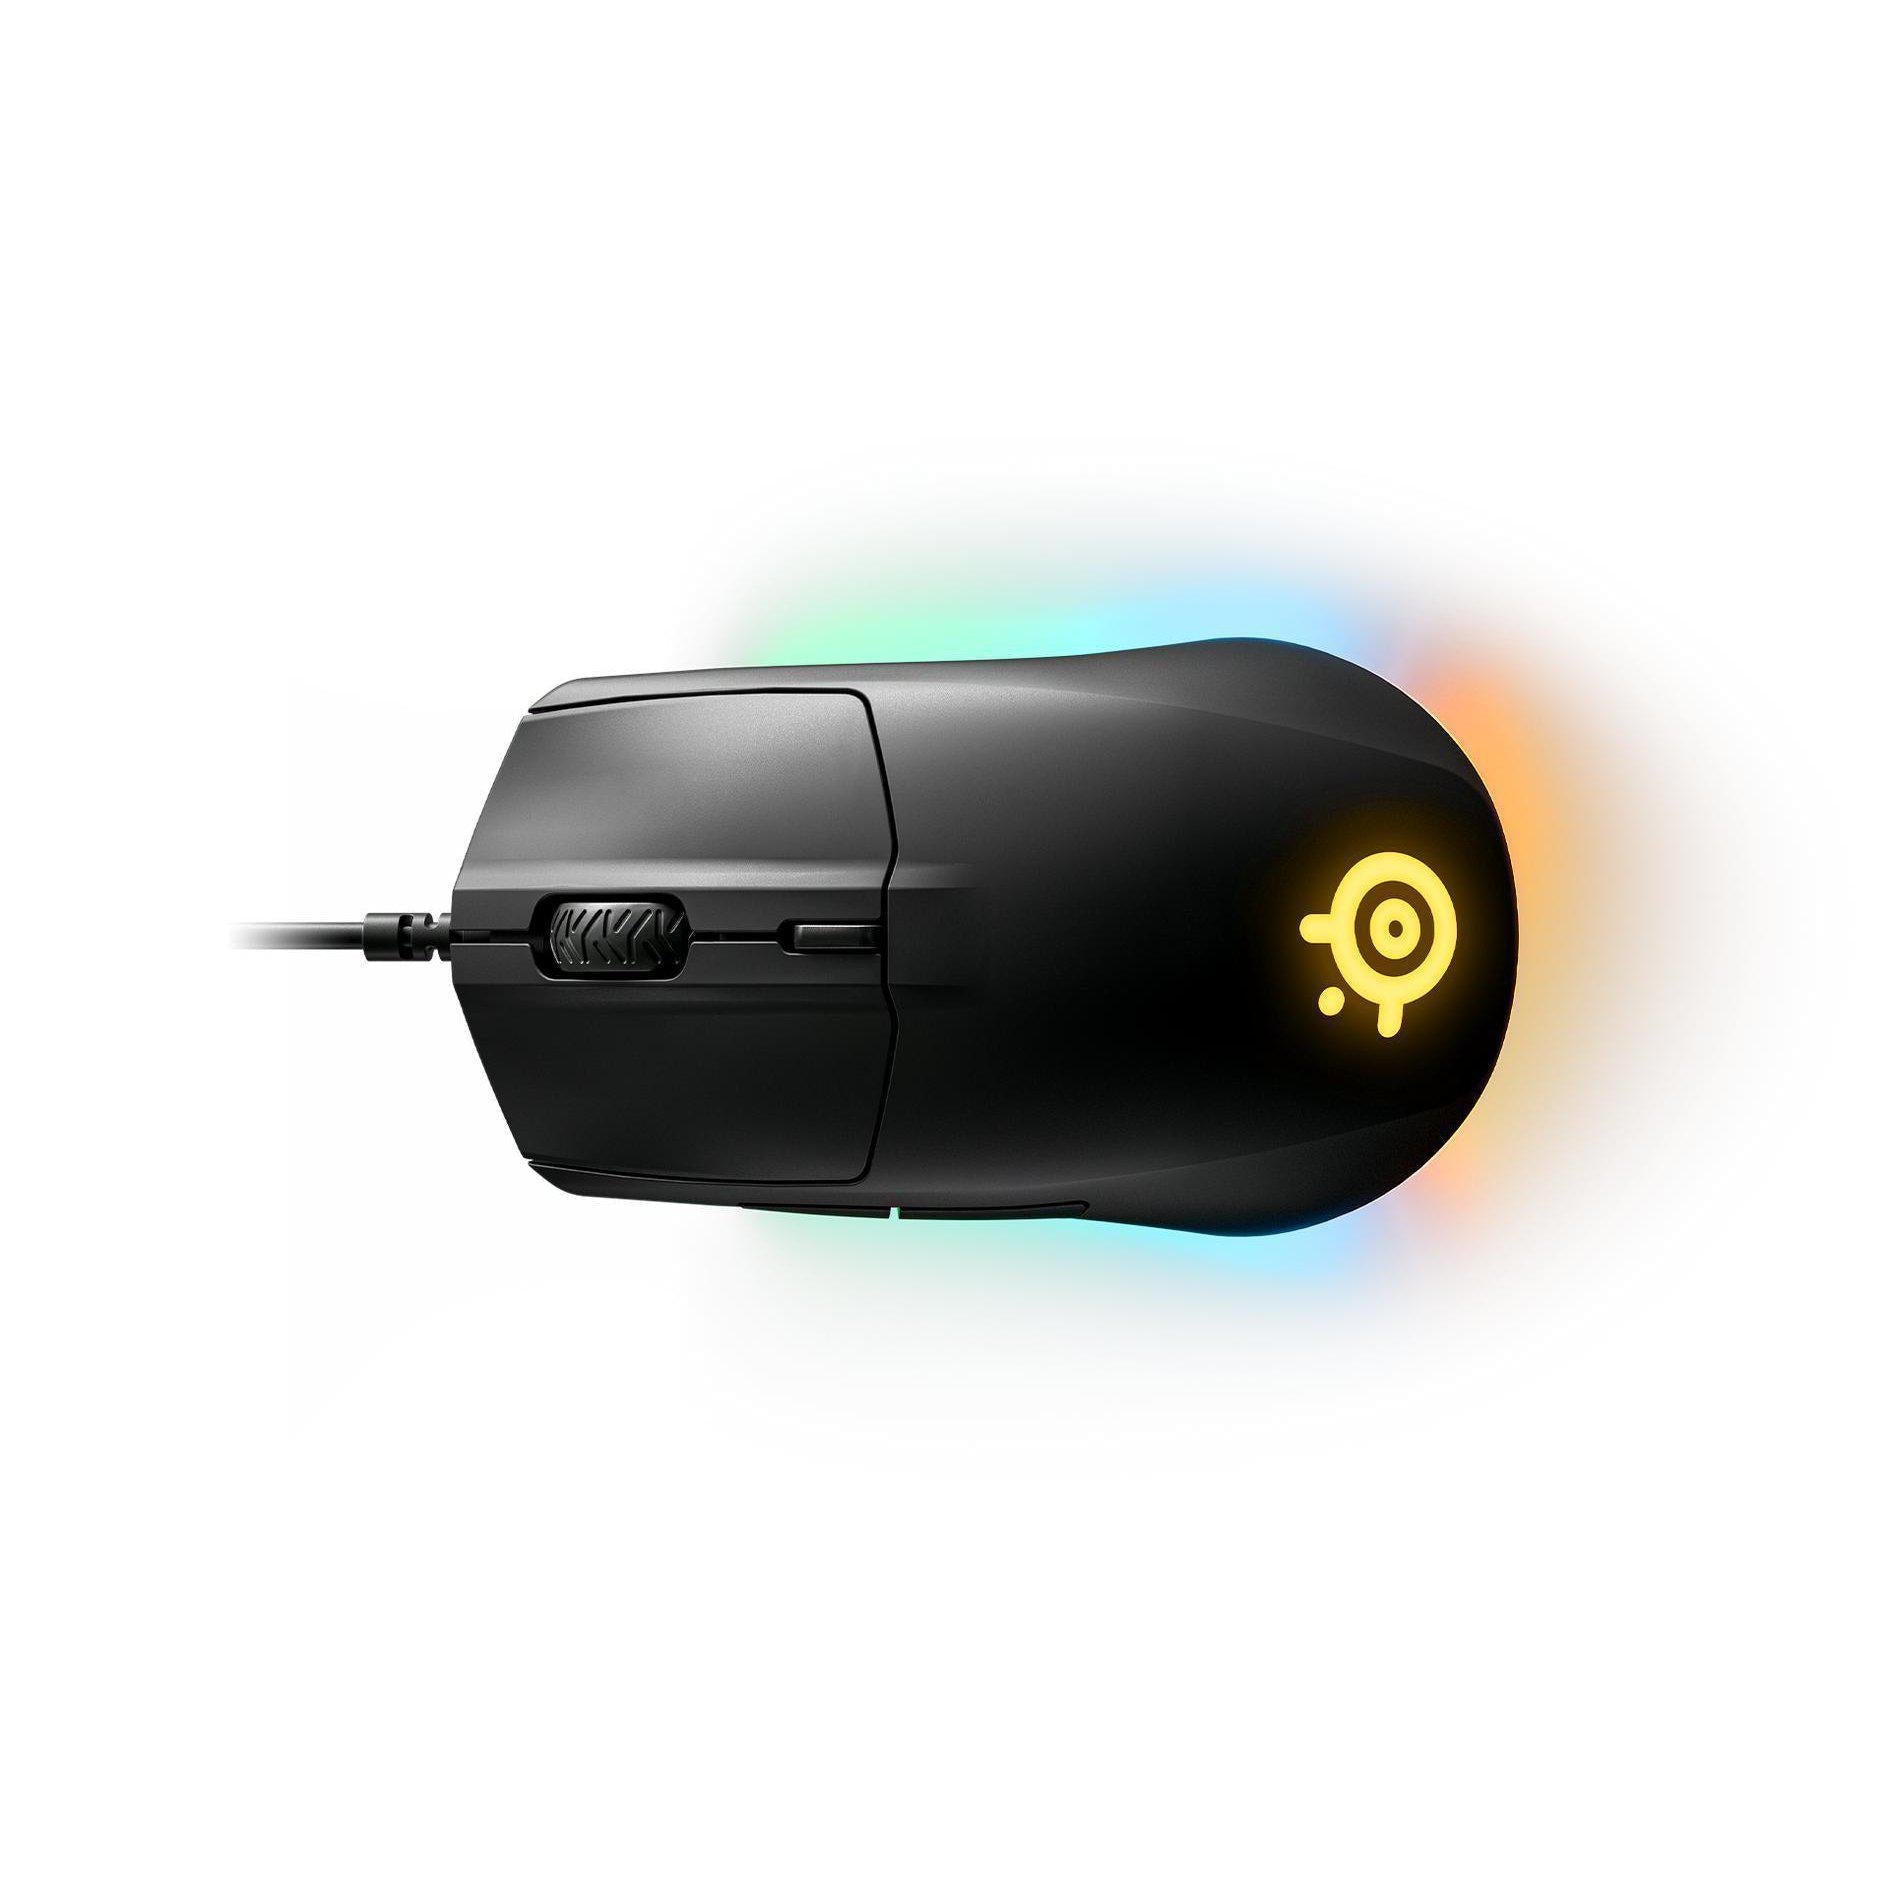 STEELSERIES RIVAL 3 GAMING MOUSE-MOUSE-Makotek Computers